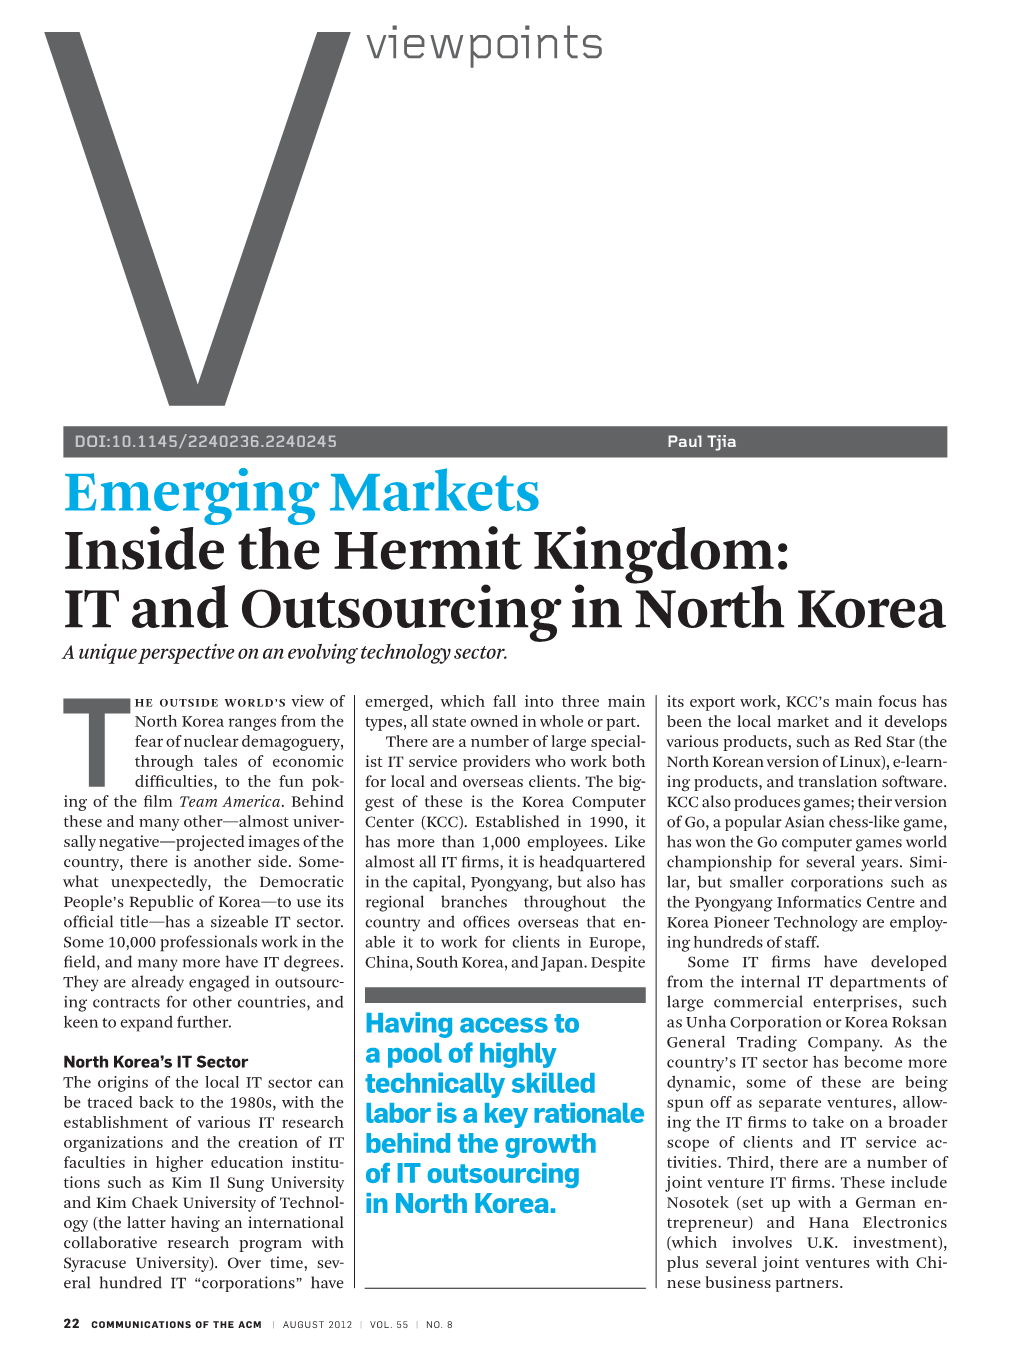 IT and Outsourcing in North Korea a Unique Perspective on an Evolving Technology Sector